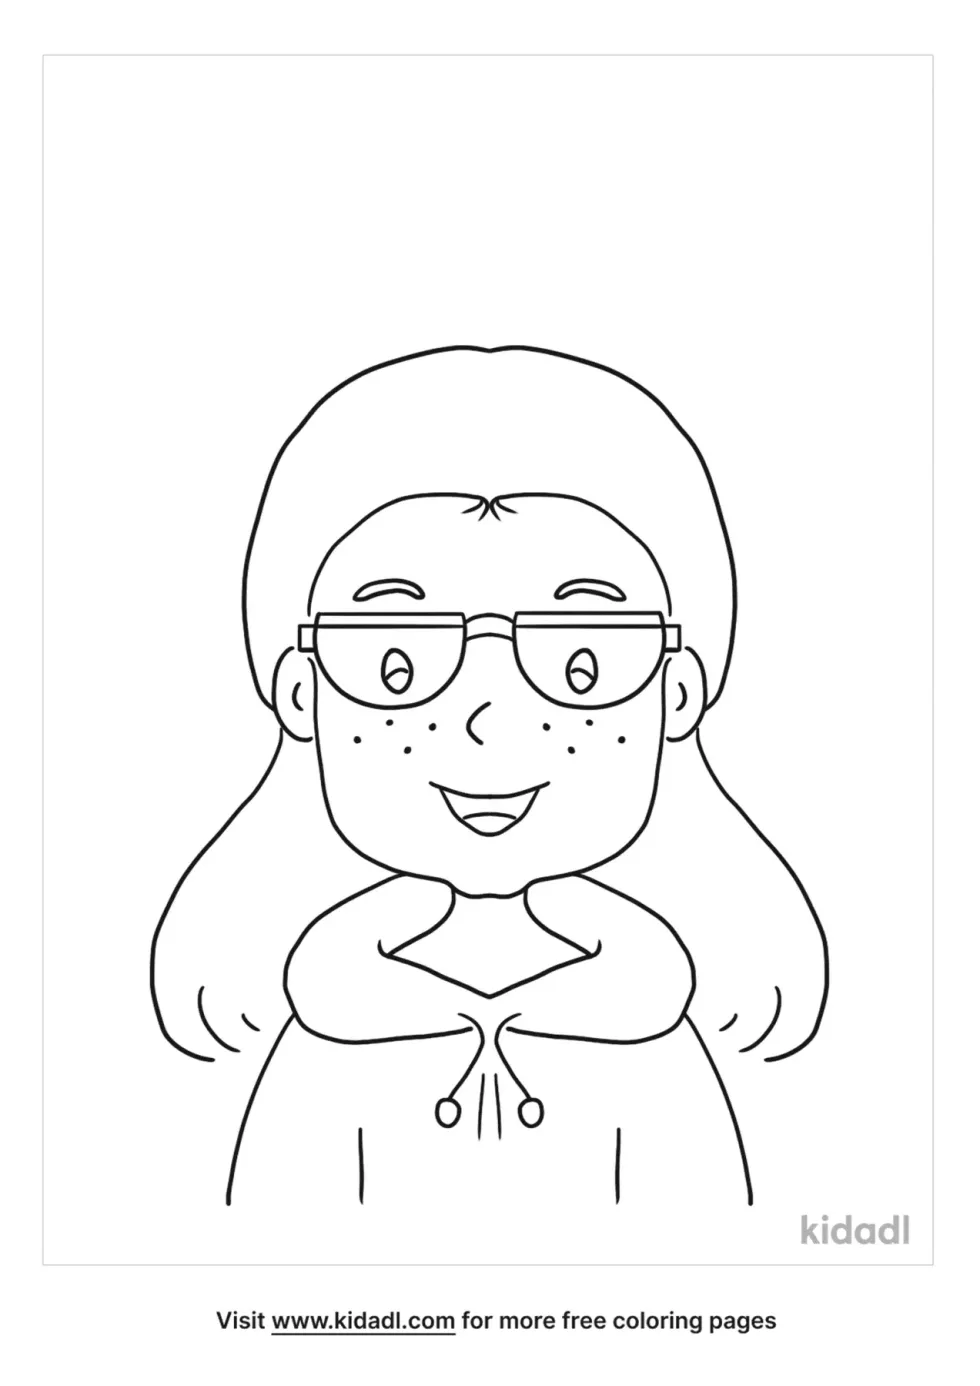 Girls With Glasses And Freckles Coloring Page